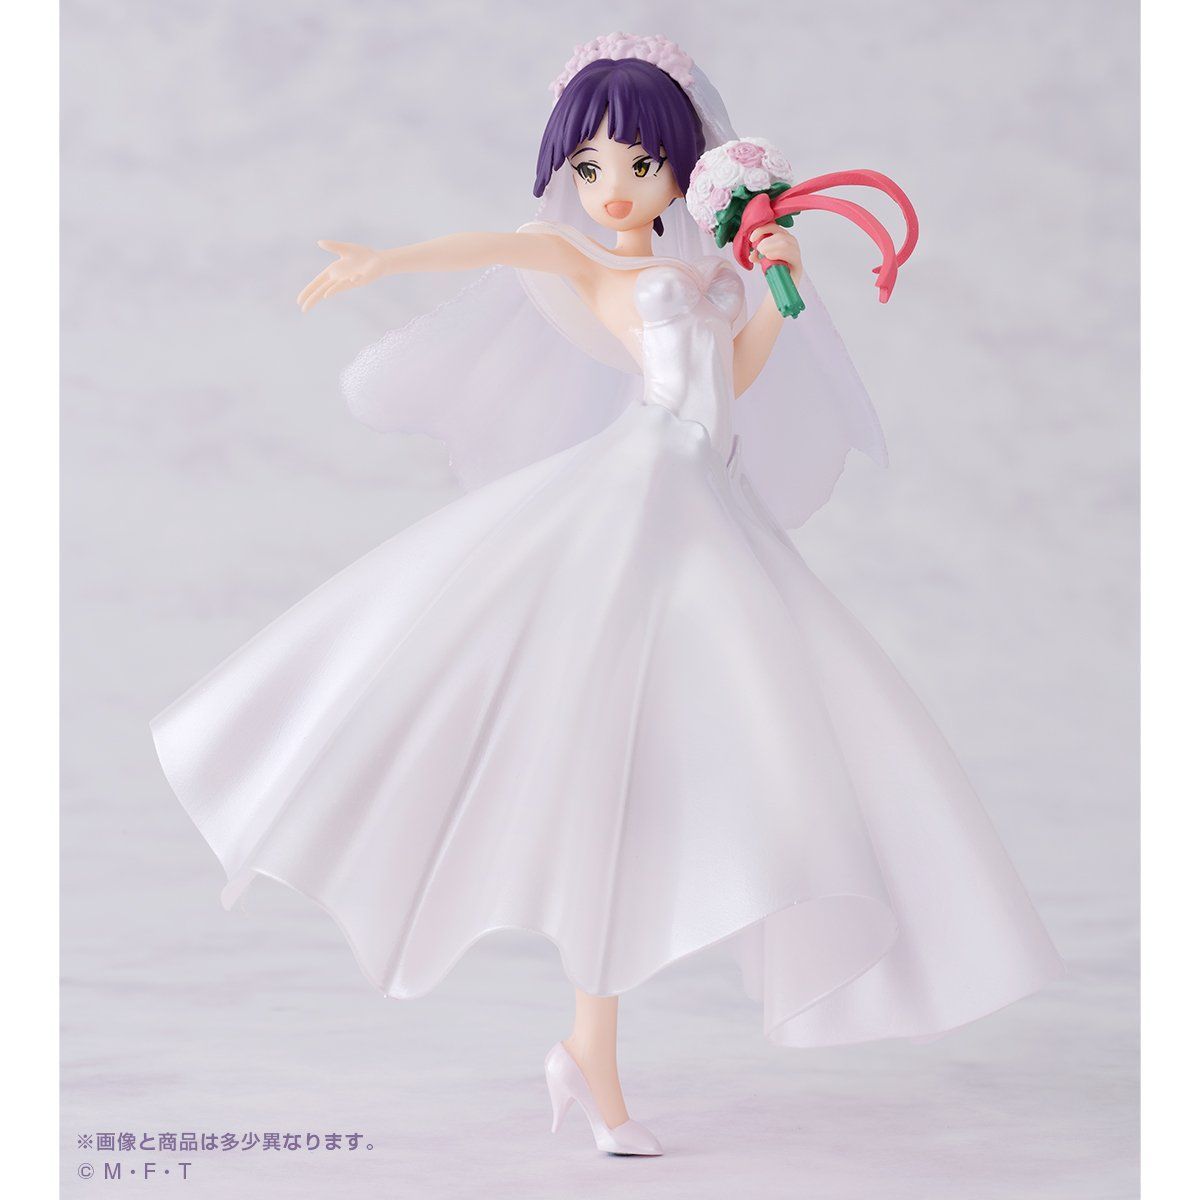 New [GeGeGe no Kitaro] erotic figure to undress even clothes in the erotic wedding dress of the cat daughter! 5